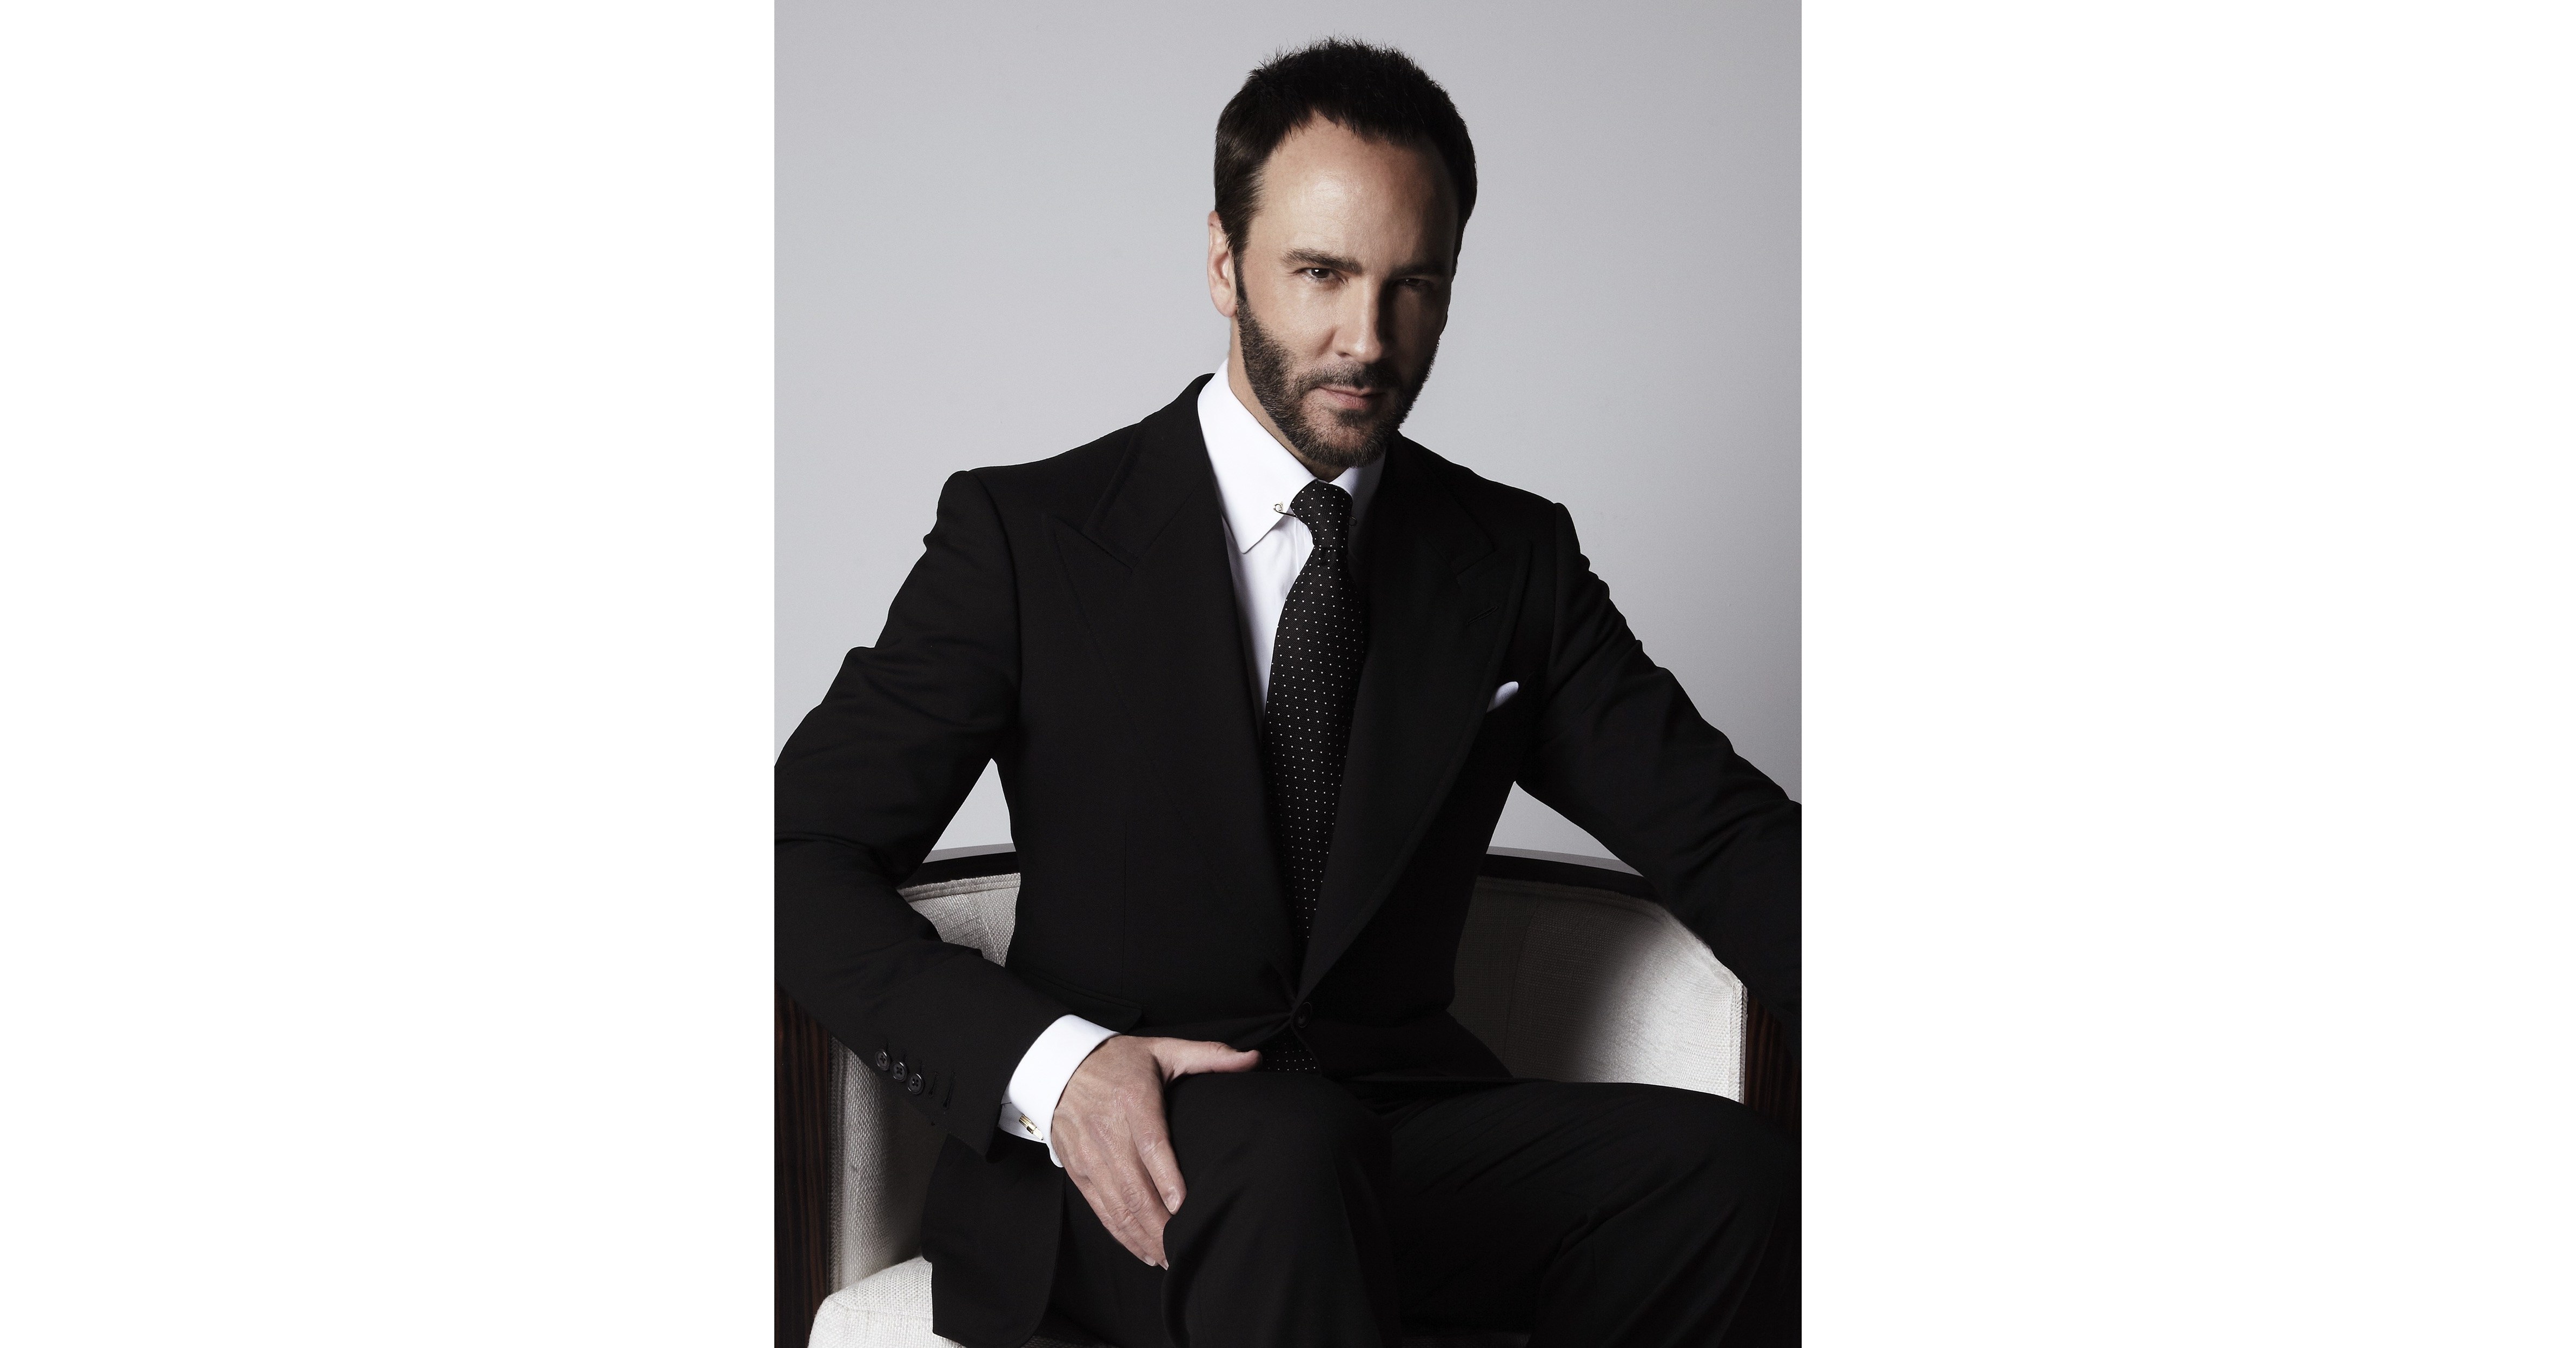 CFDA names Tom Ford as chairman